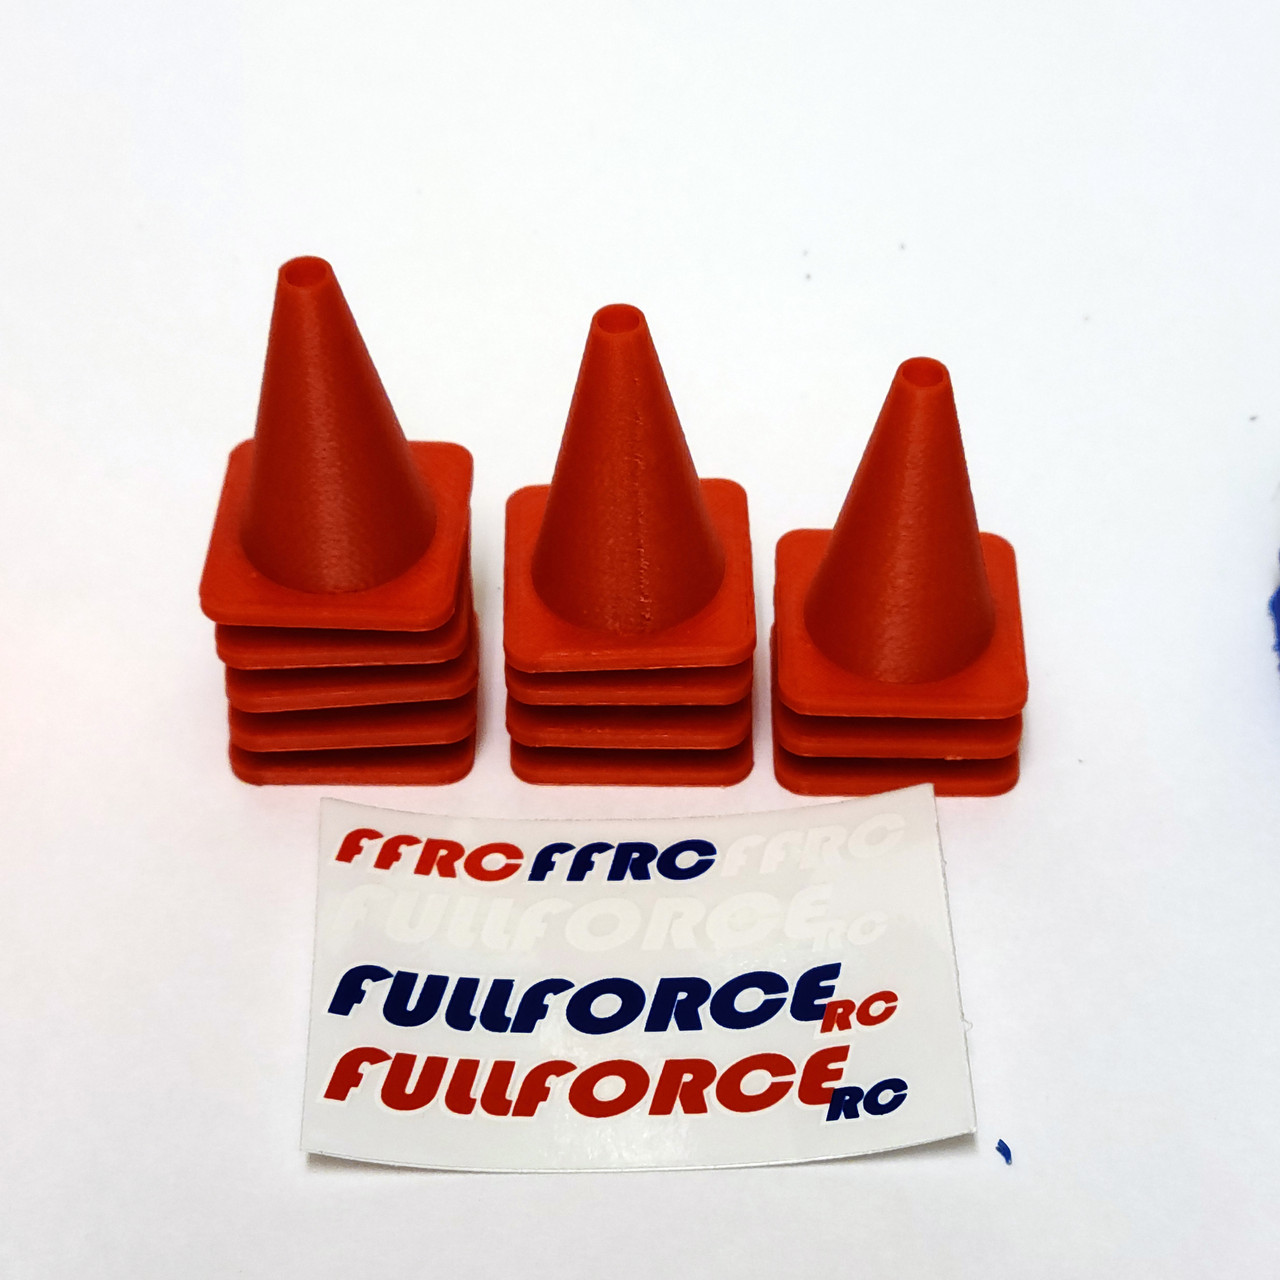 10th SCALE 3D PRINTED ABS TRAFFIC CONES 12 PCS